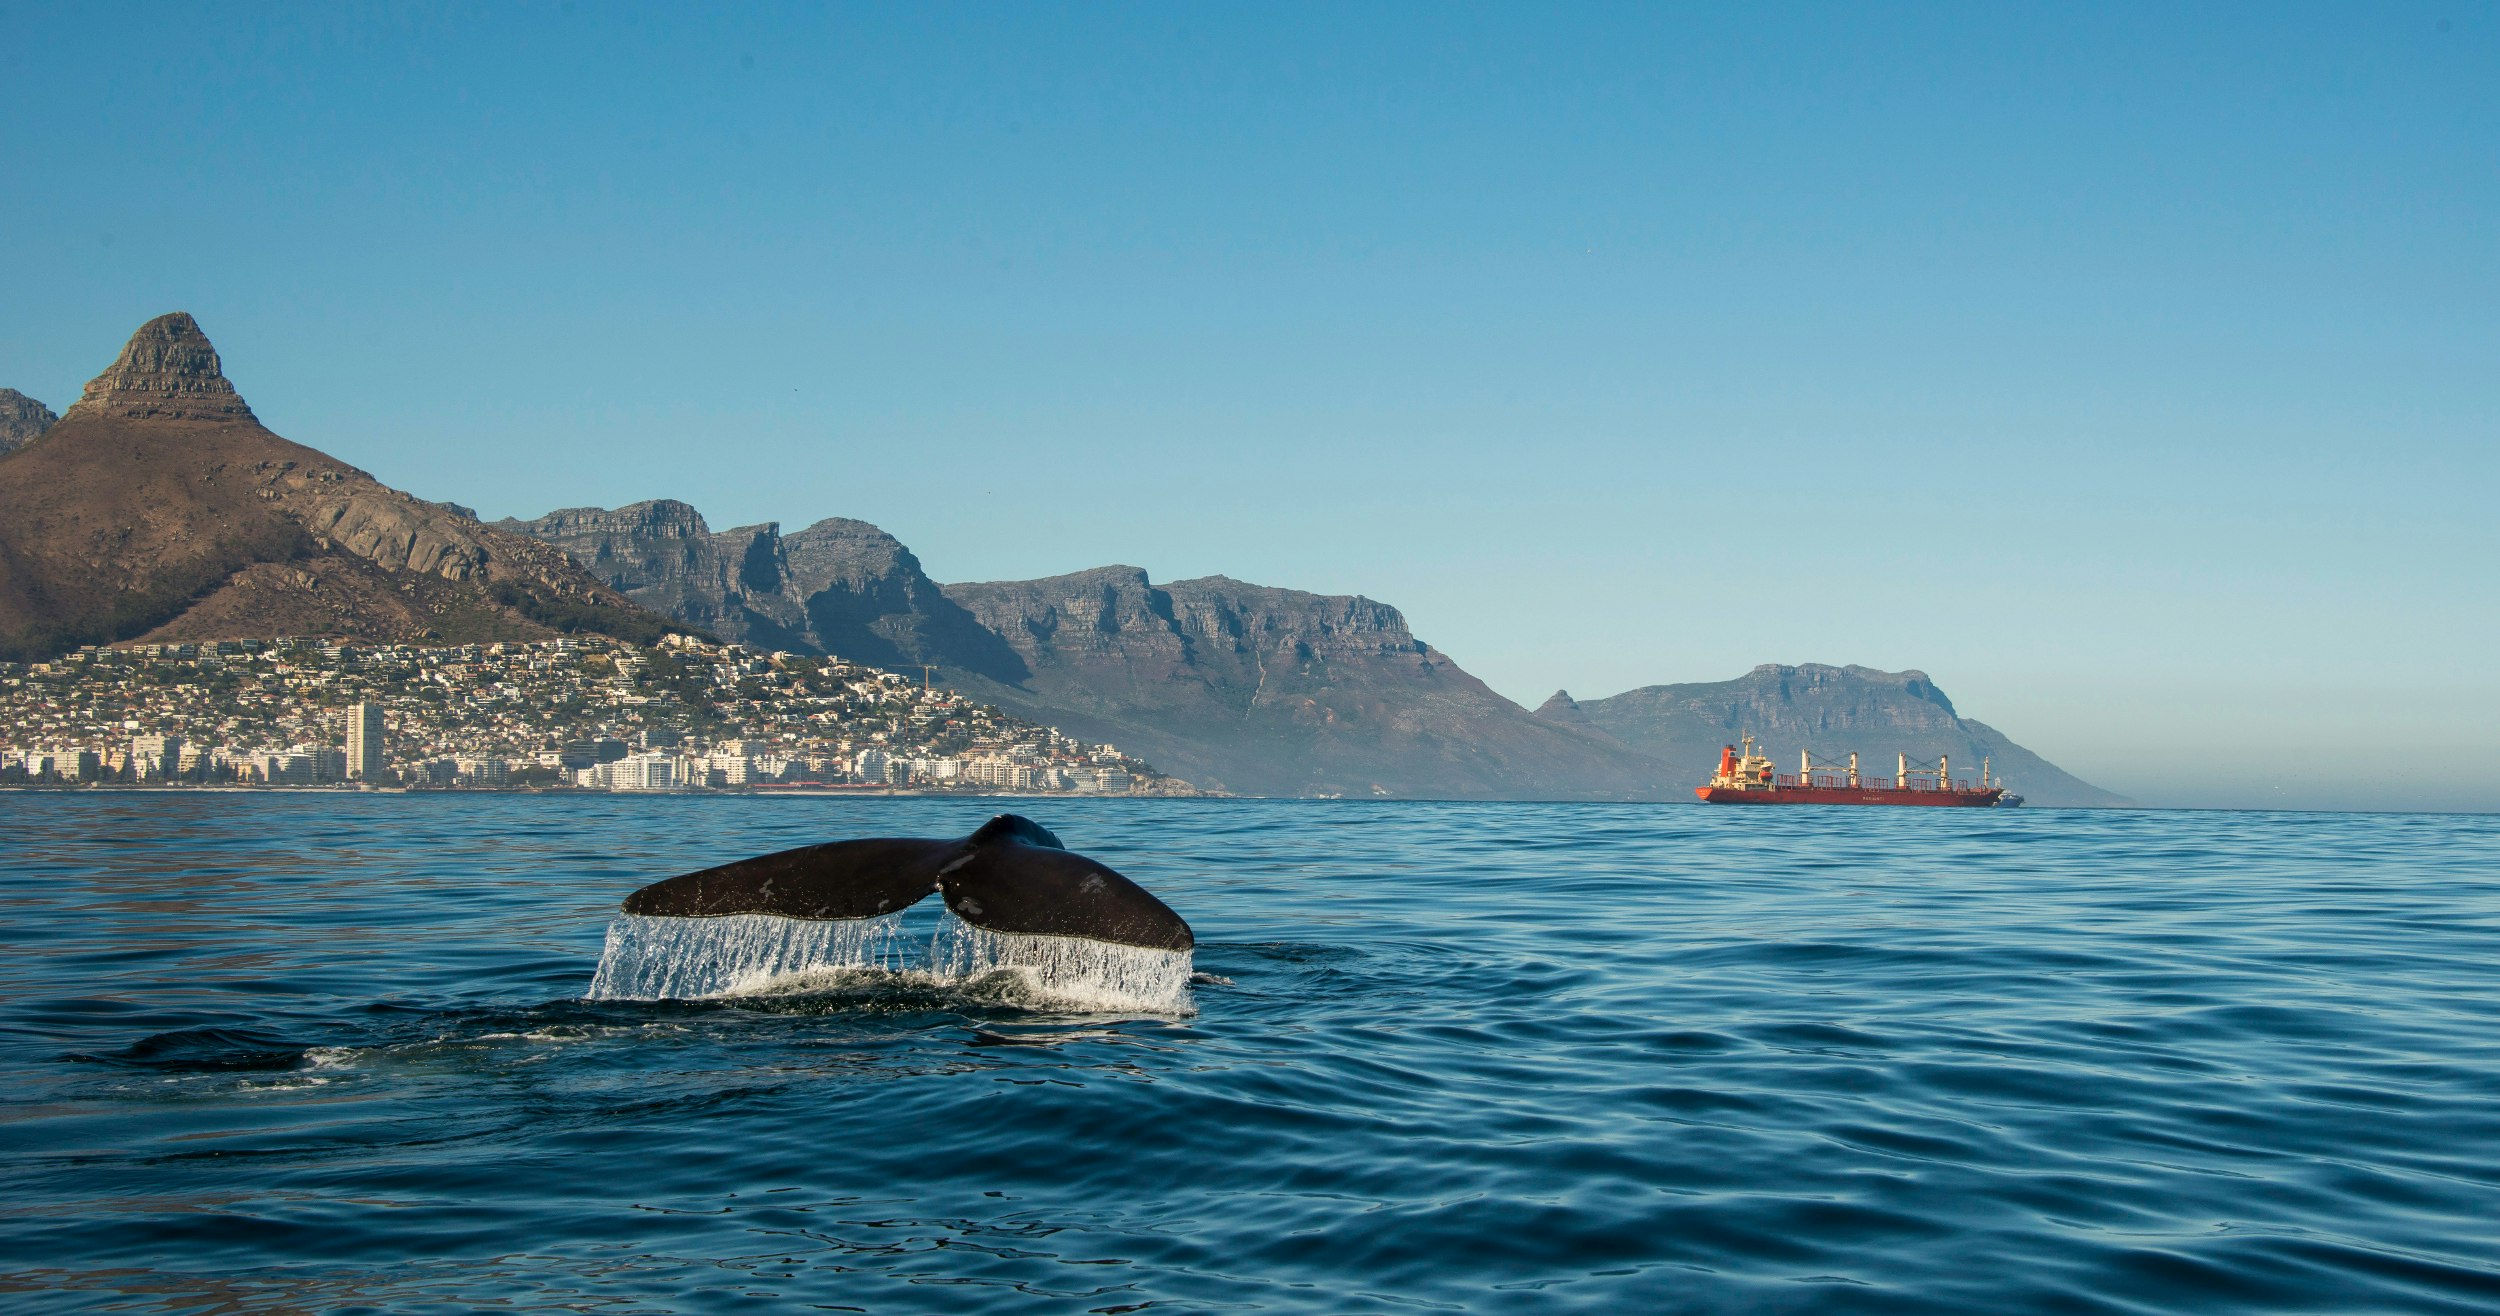 The flute of a southern right whale is visible above the water, with the distinctive coastline of Cape Town (the signature Lion's Head peak) visible in the background.